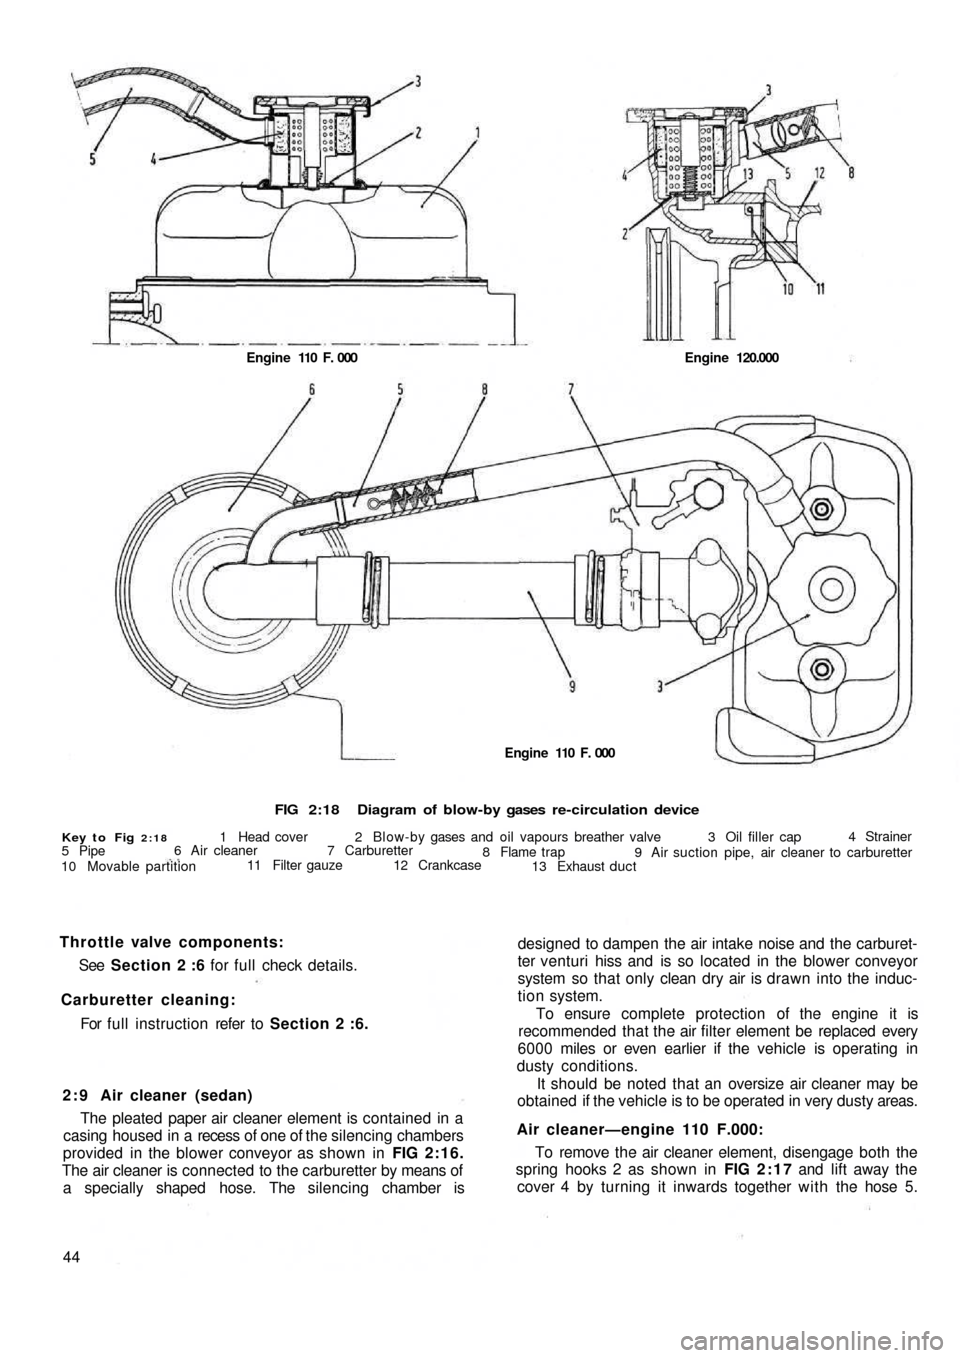 FIAT 500 1973 1.G Owners Guide FIG 2:18Diagram of blow-by gases  re-circulation device
Key to Fig 2:181 Head cover 2 Blow-by gases and  oil vapours breather valve 3 Oil filler cap4 Strainer
9 Air suction pipe, air cleaner to carbur